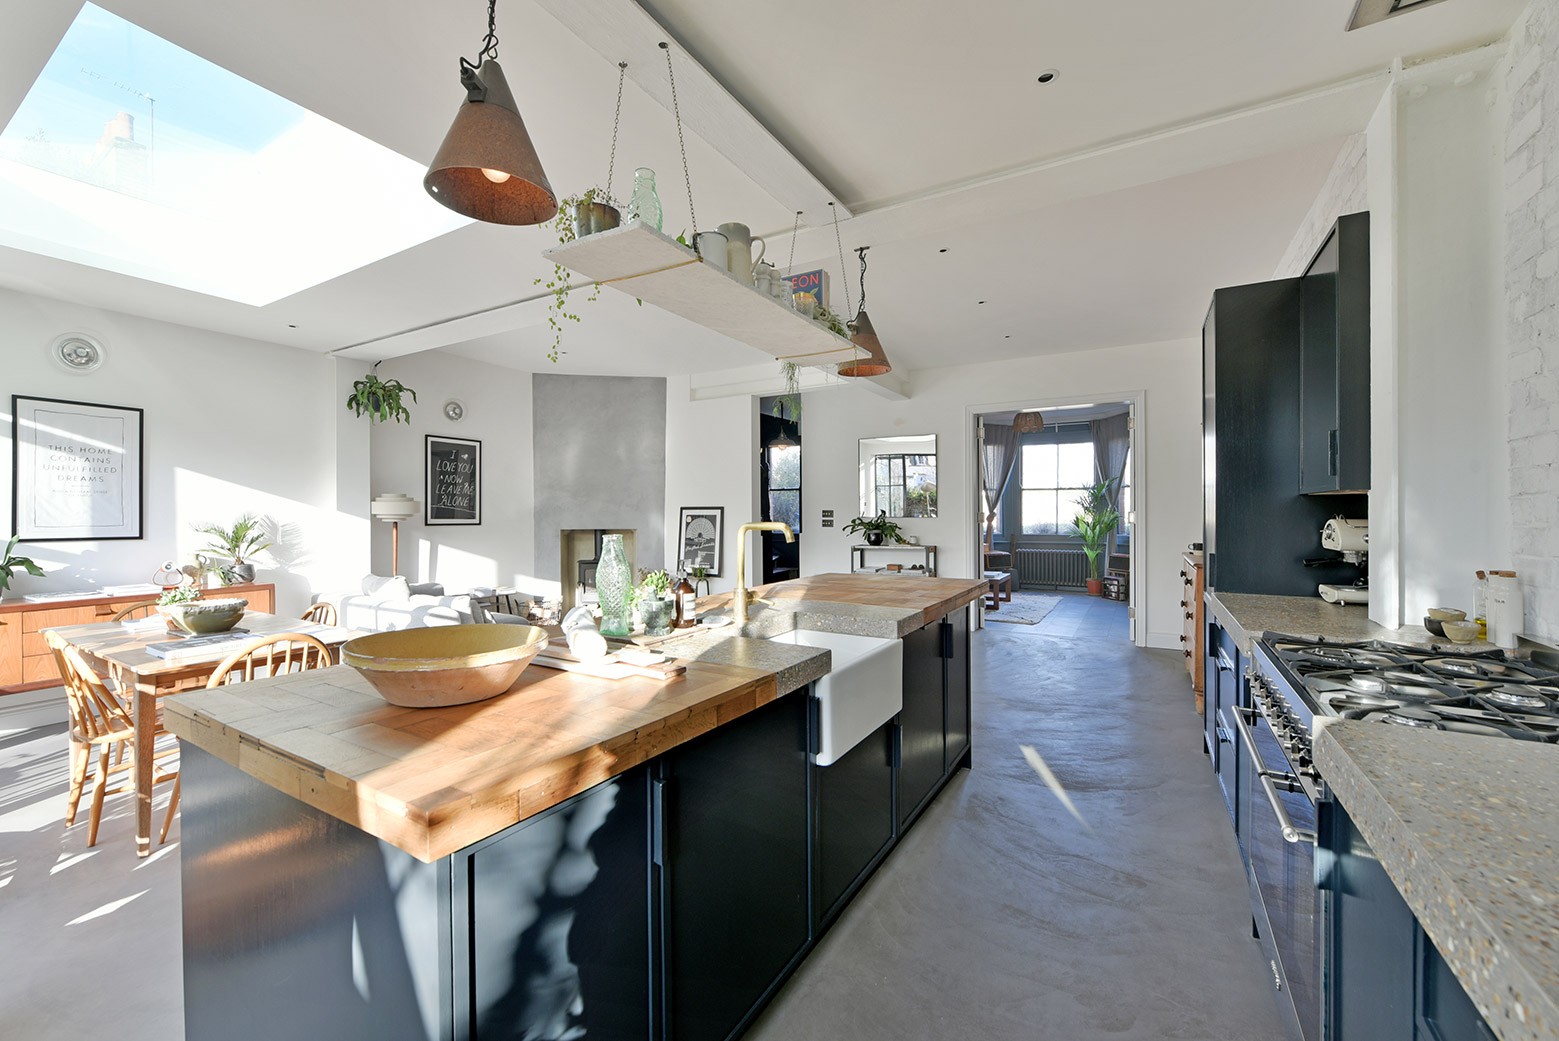 The ultimate in modern kitchens, complete with concrete worktops